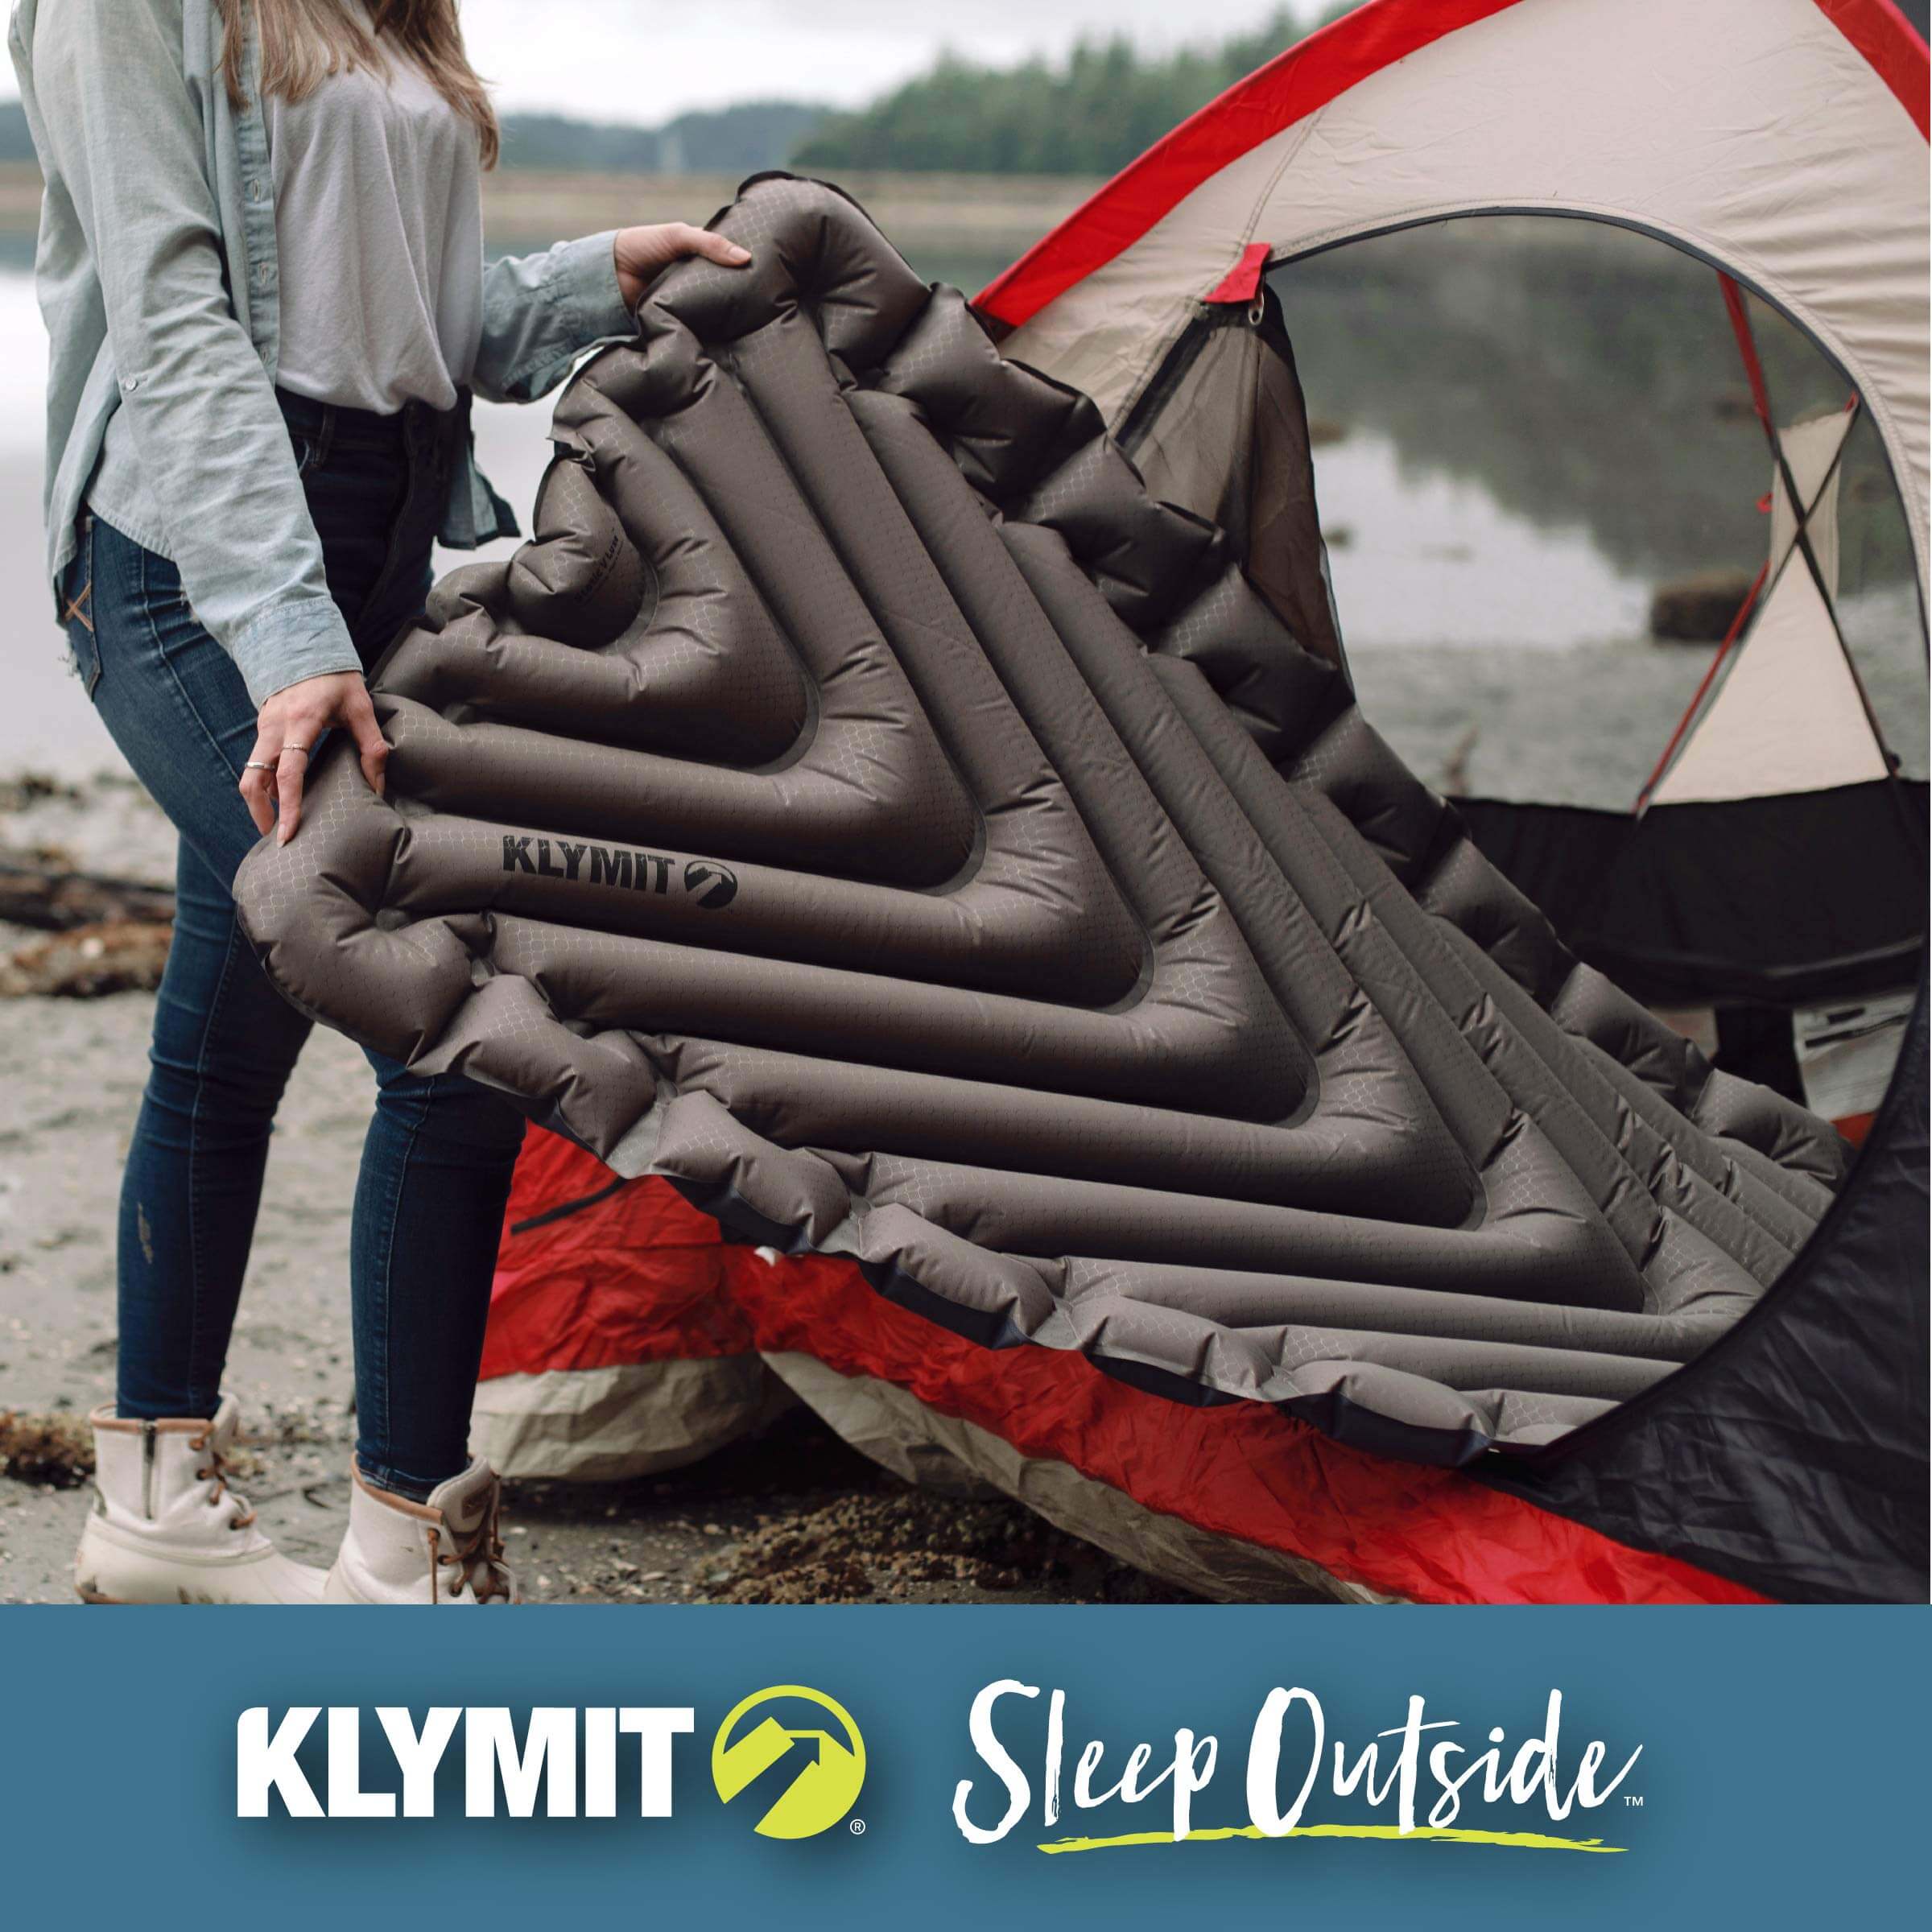 Klymit Insulated Static V Luxe Isomatte